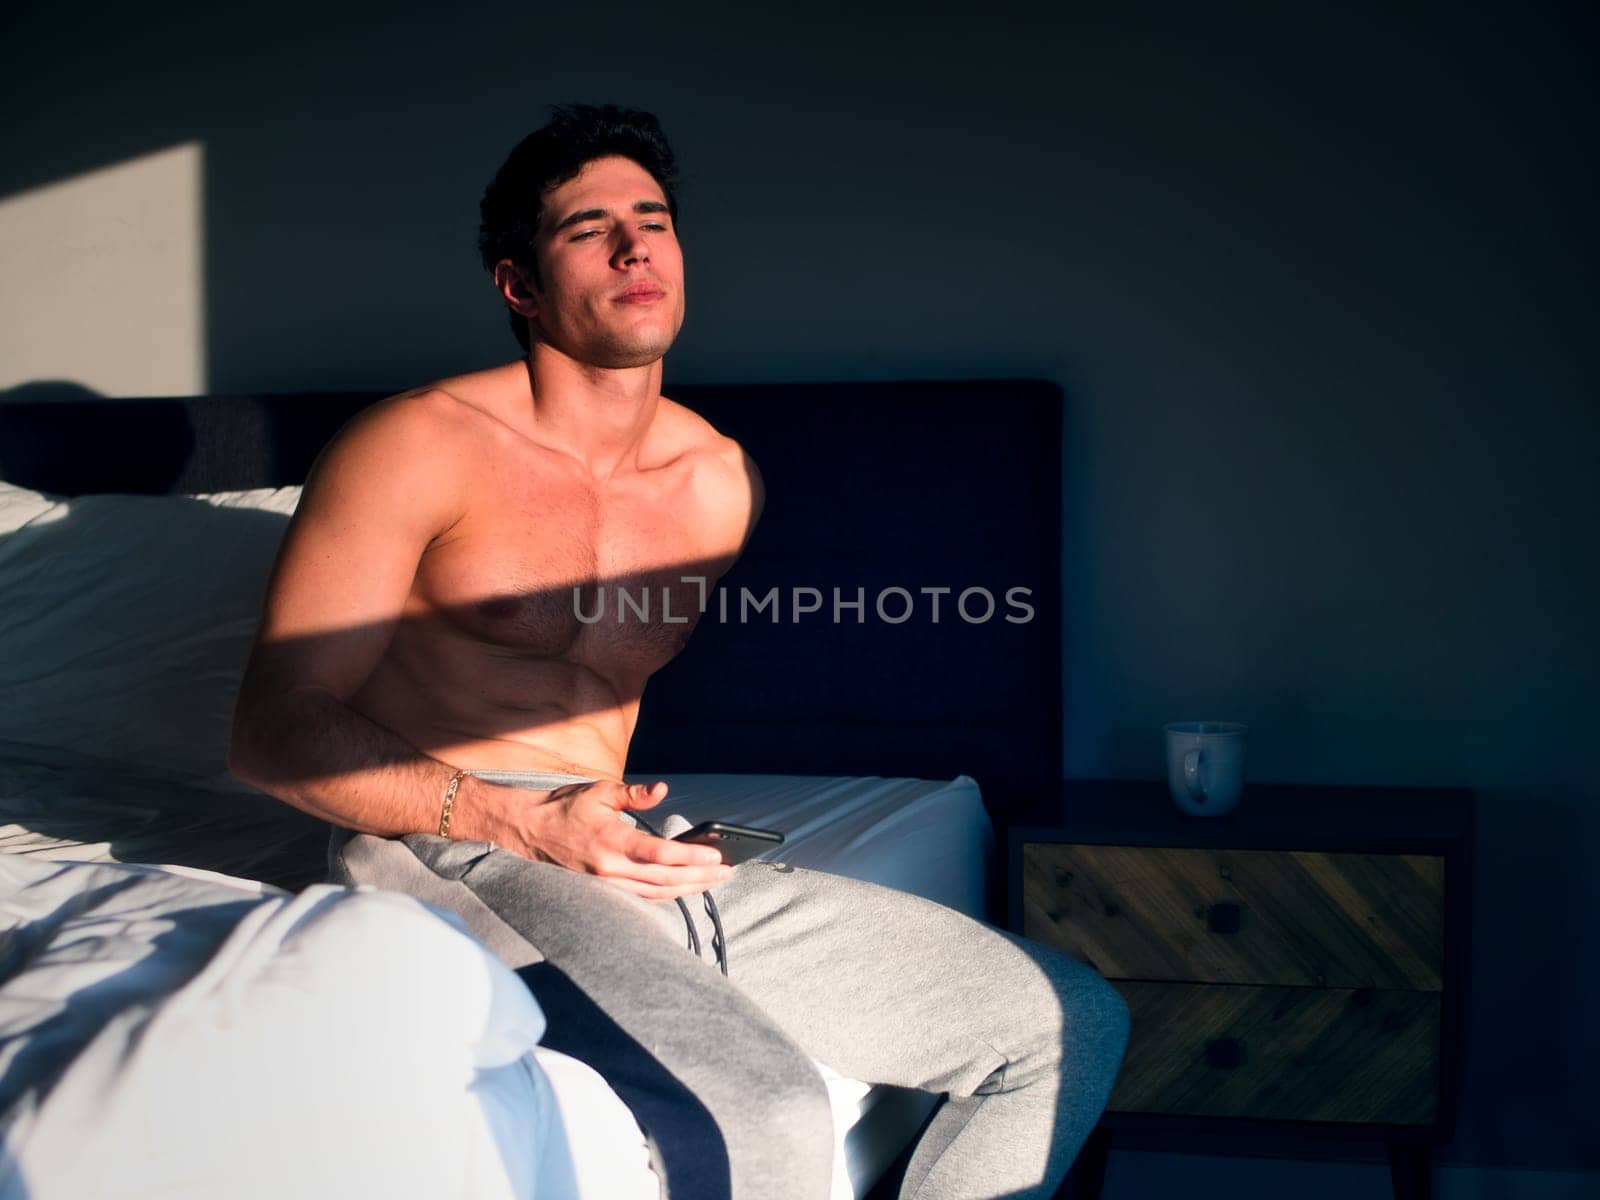 Photo of a shirtless man sitting on a bed in a bedroom in the morning by artofphoto